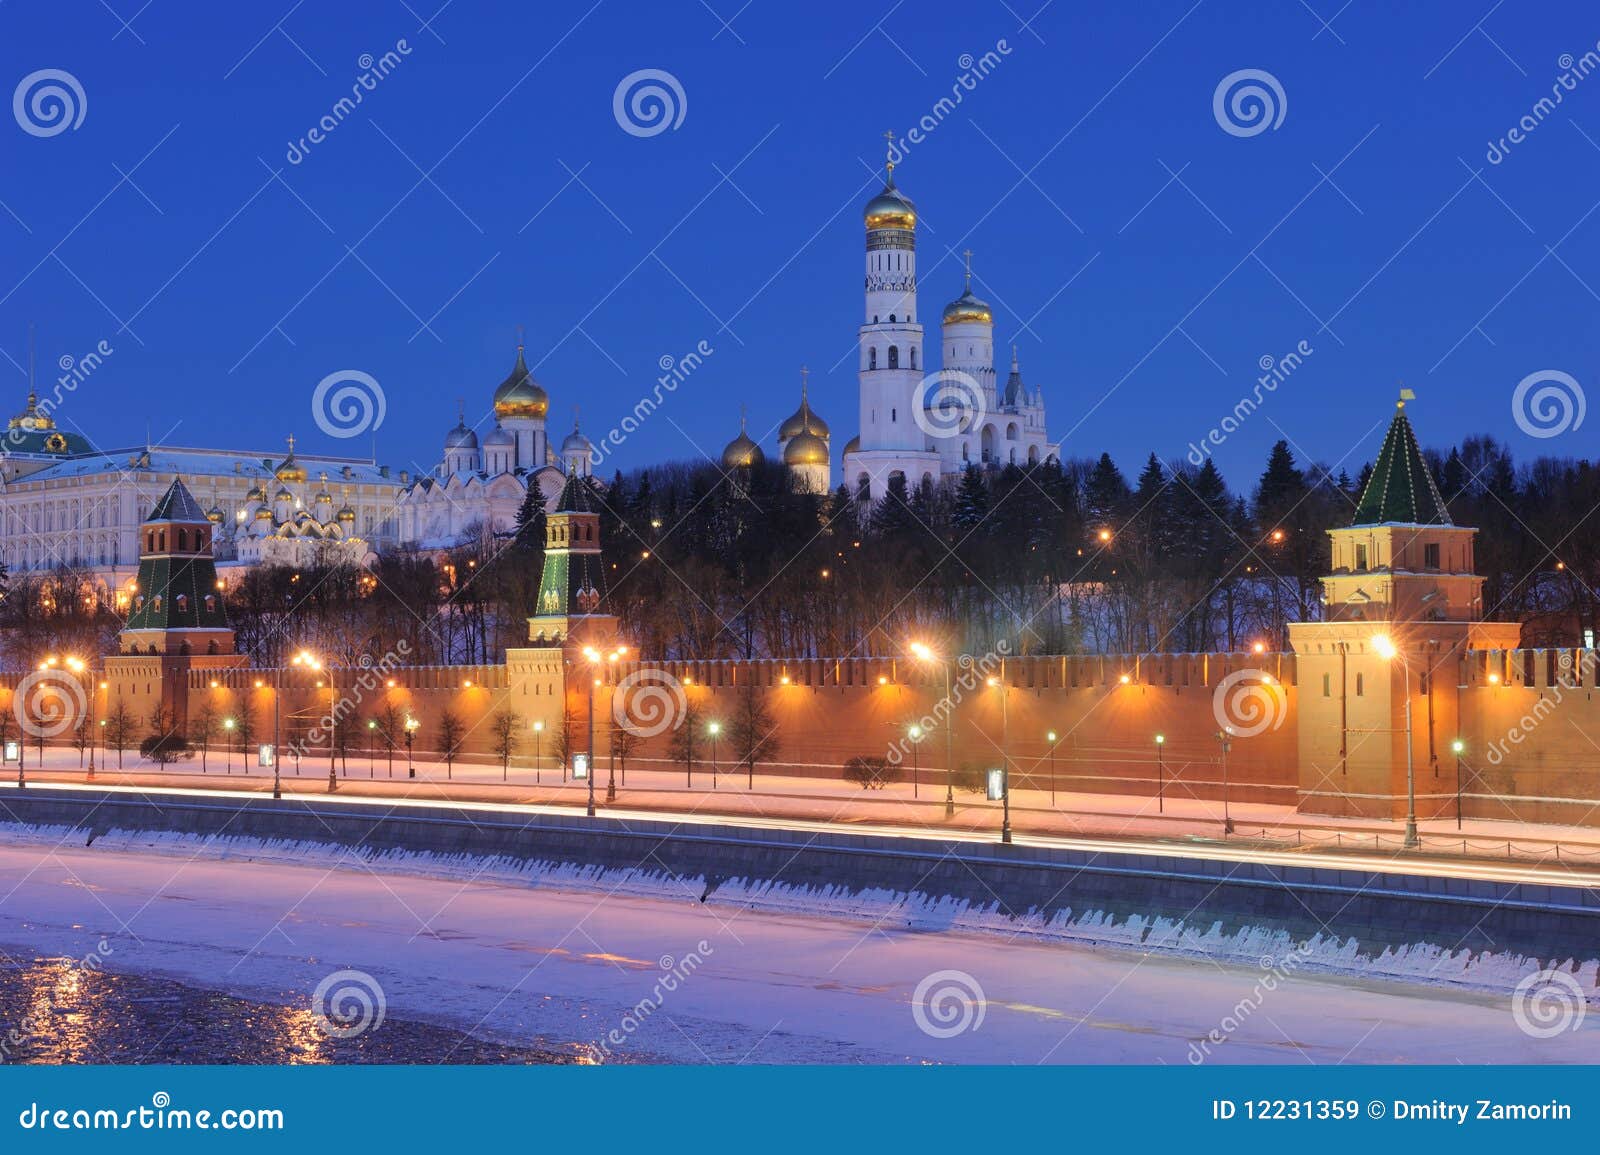 russia. ensemble of moscow kremlin at night